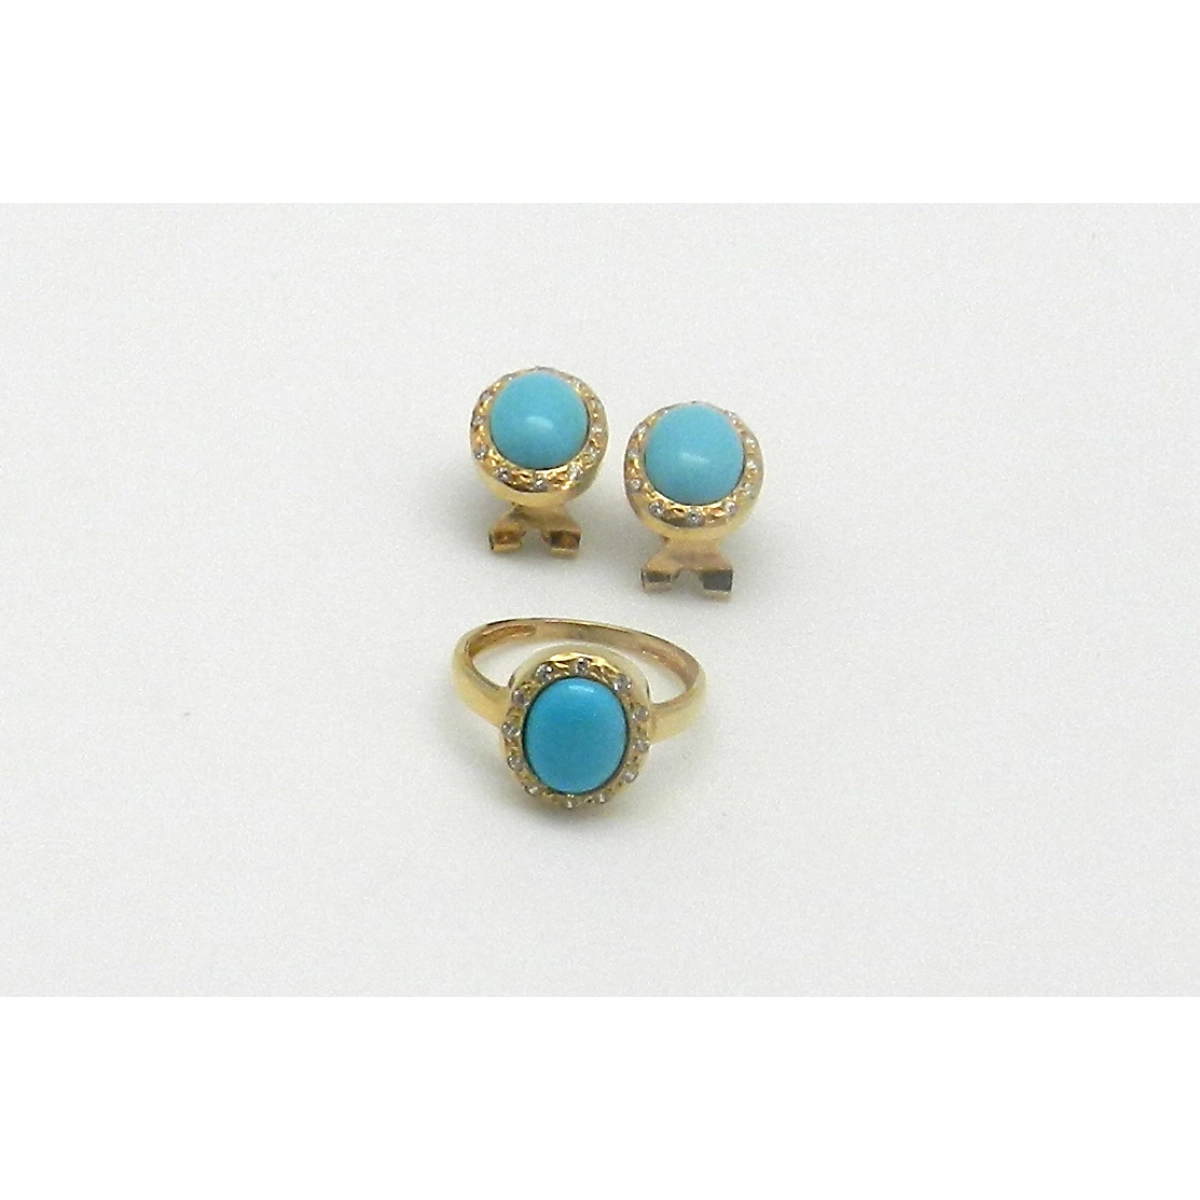 Combined set of EARRINGS and ring